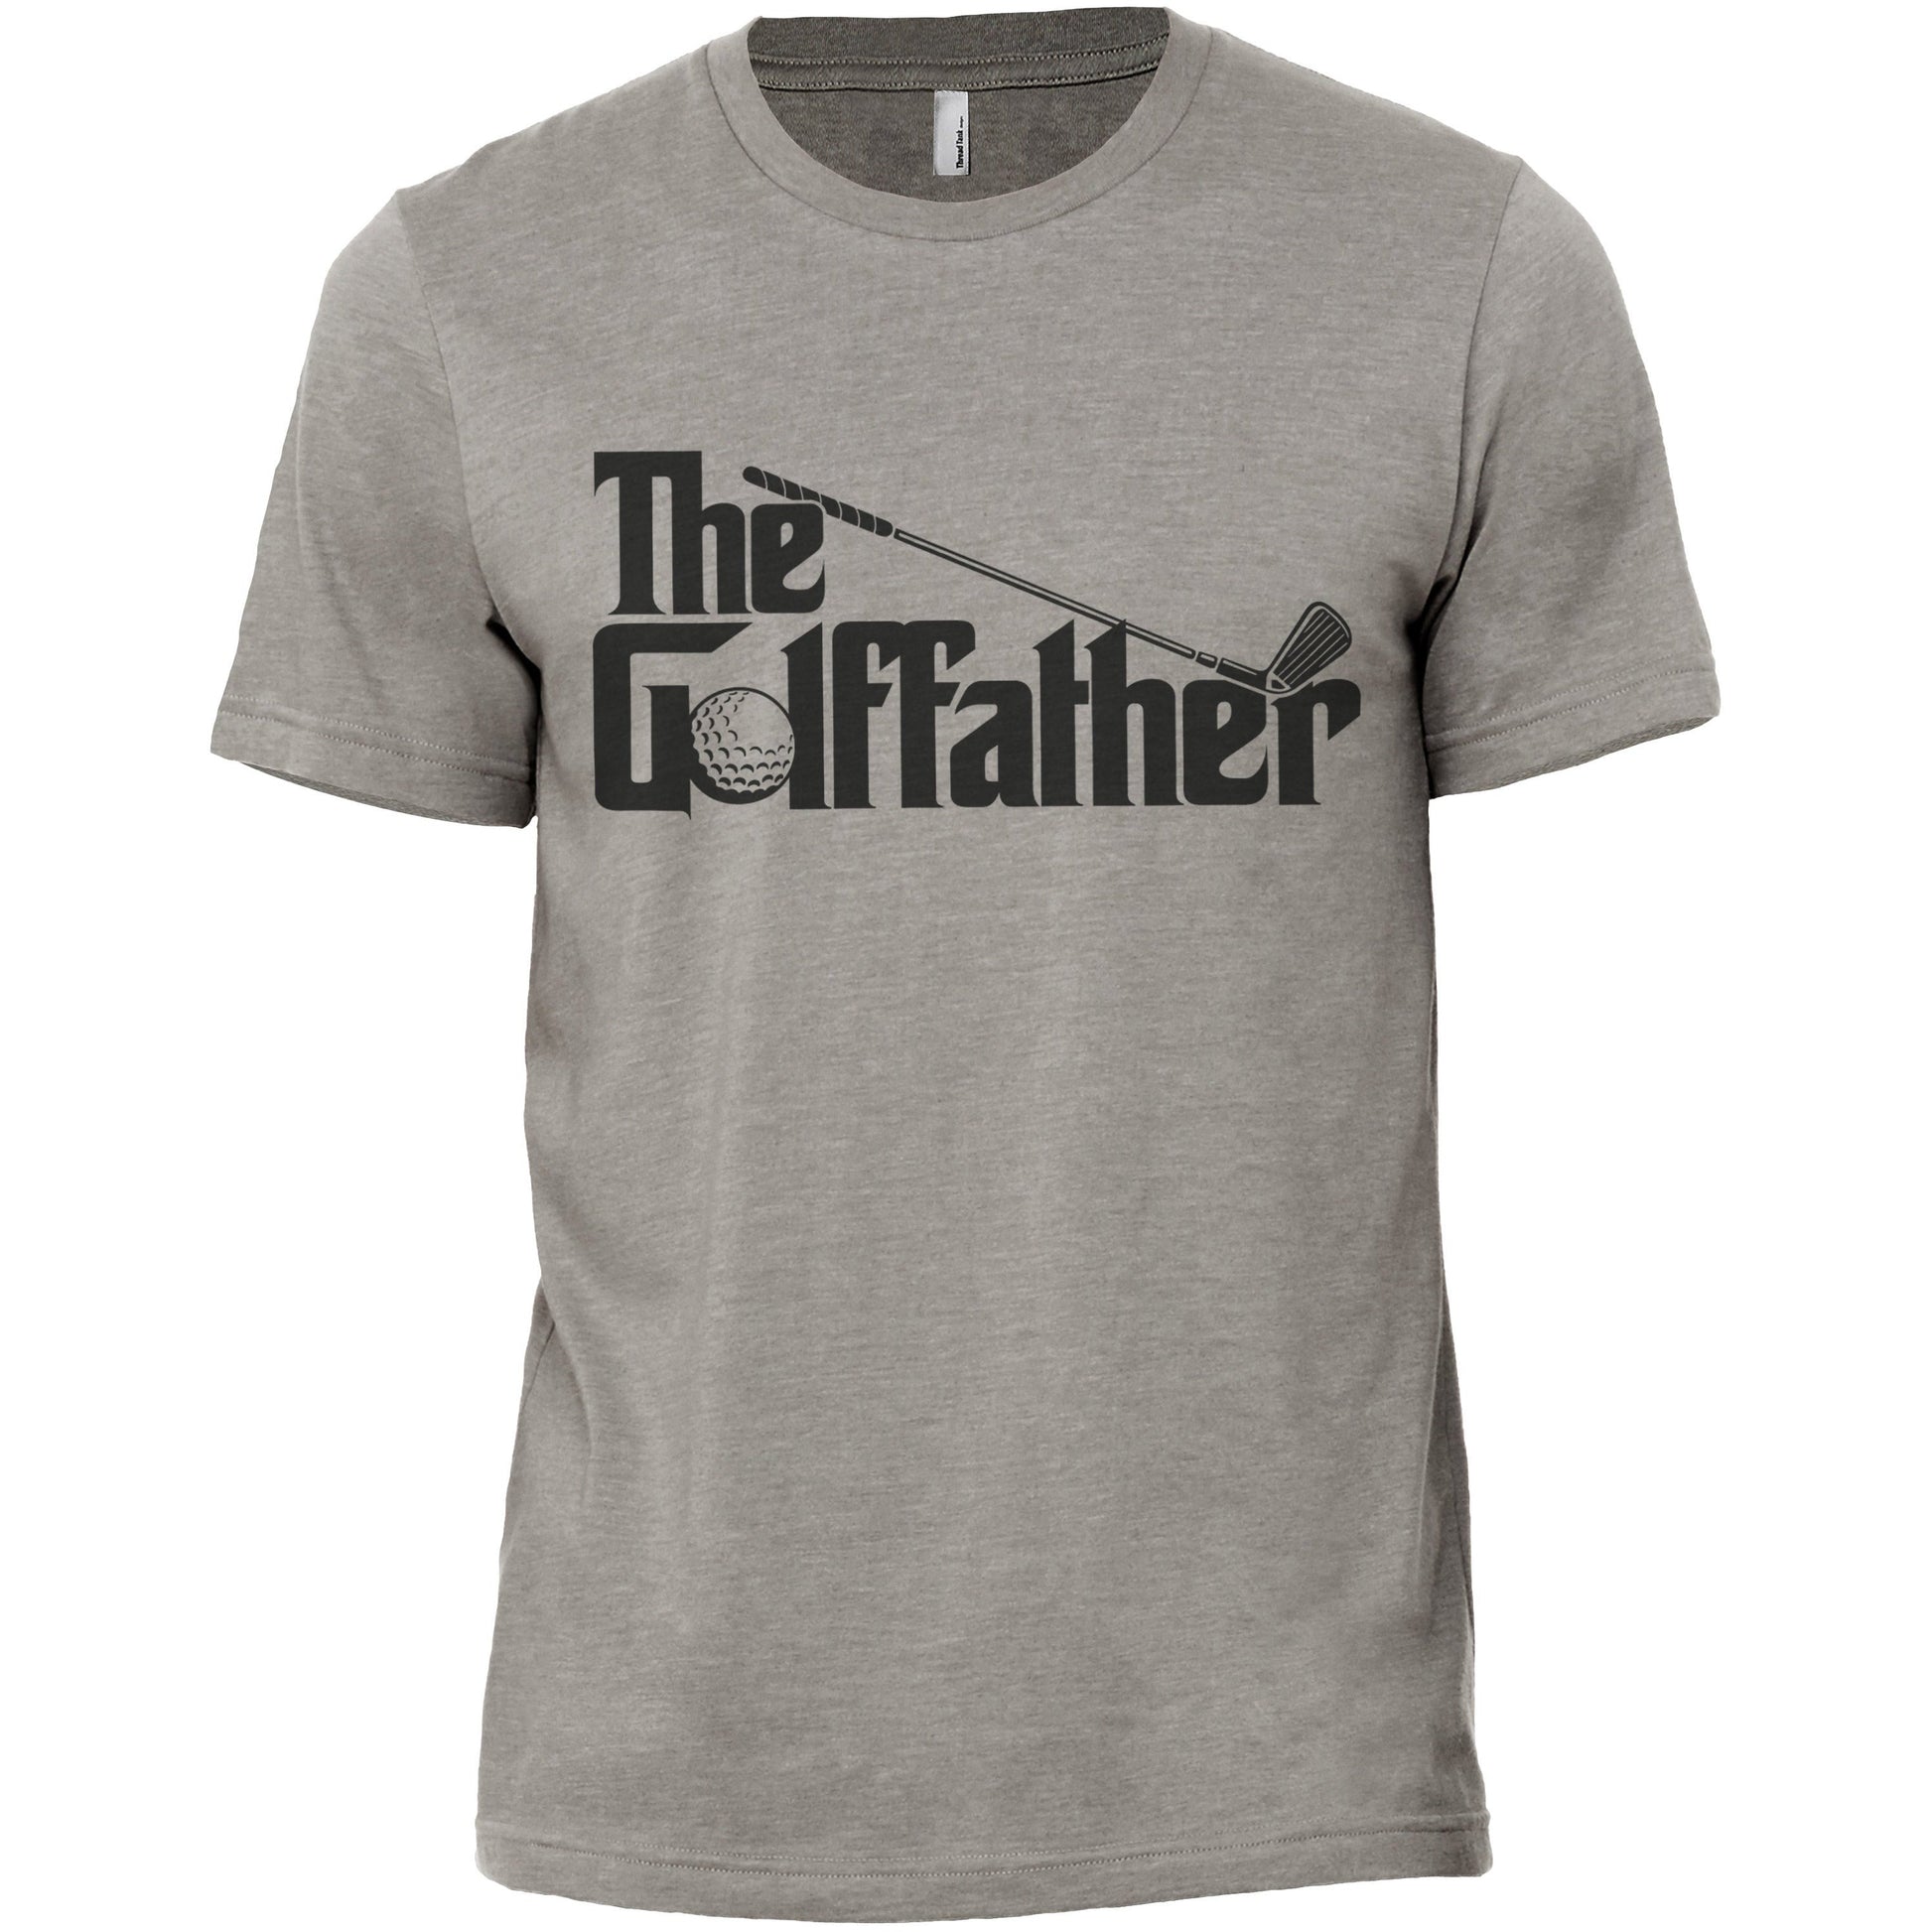 The Golf Father - Stories You Can Wear